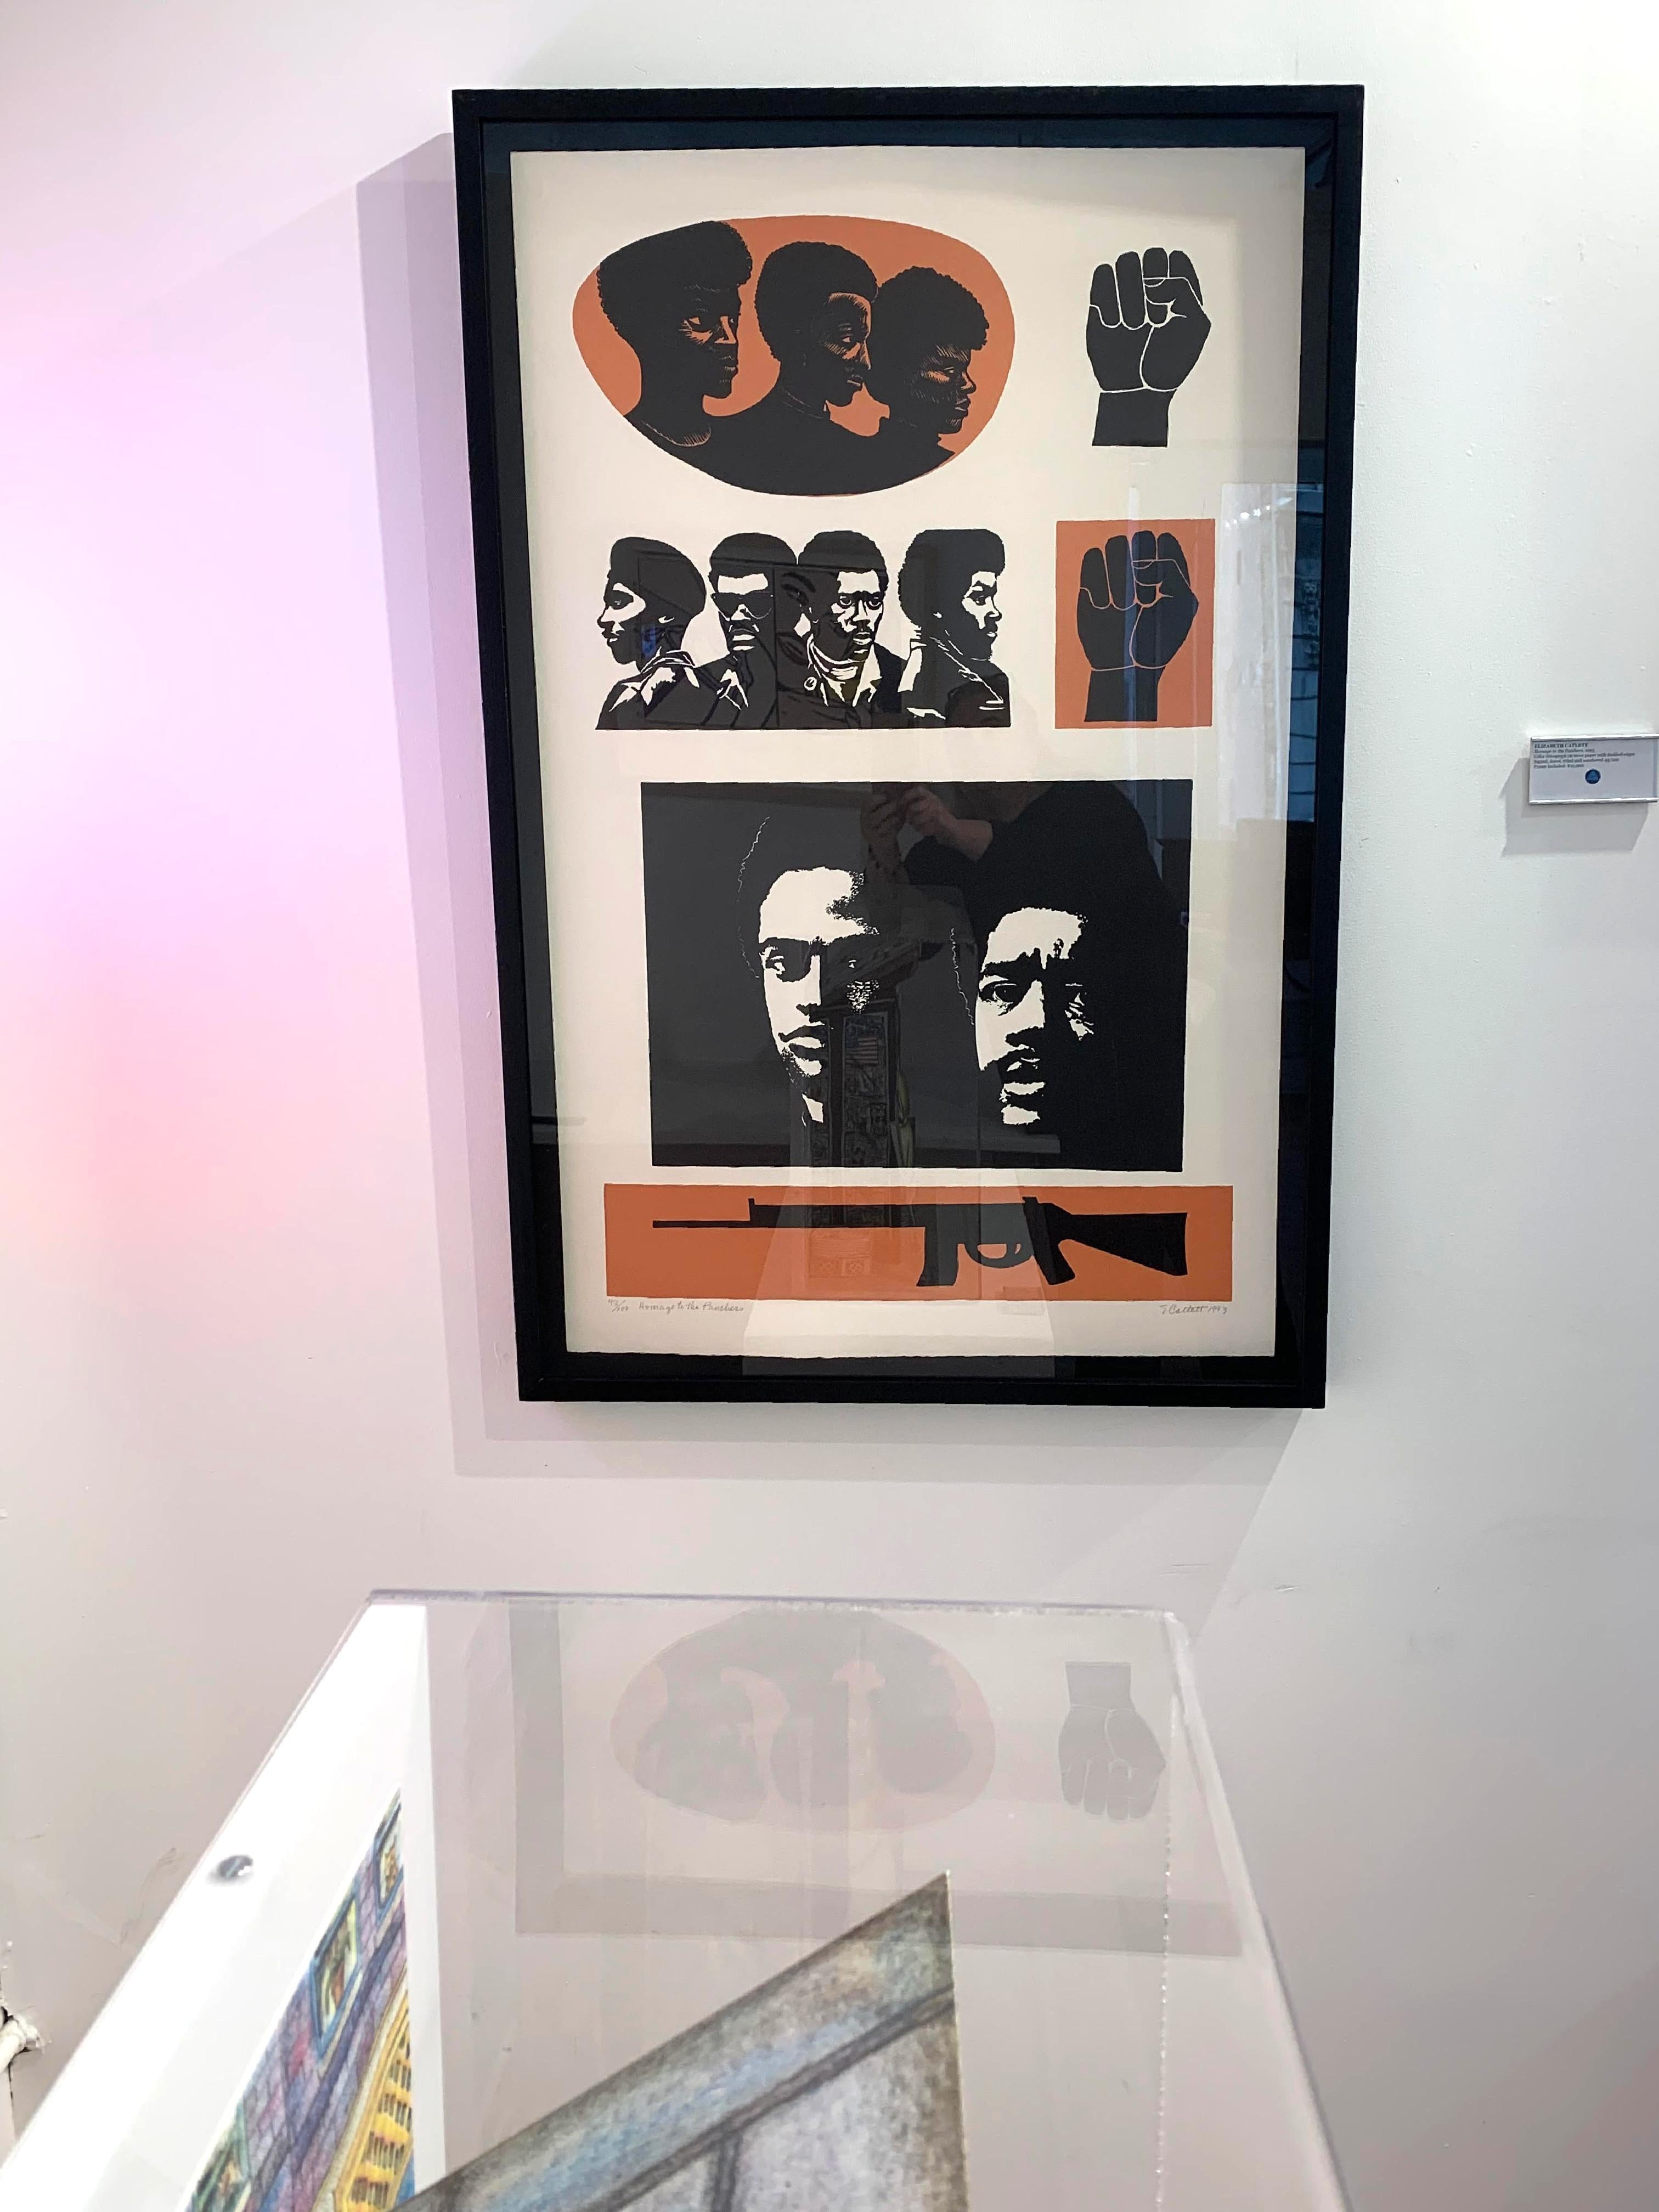 Elizabeth Catlett
Homage to the Panthers, 1993
Color Lithograph on wove paper with deckled edges
Signed, titled and dated in graphite pencil on the front
Frame Included: elegantly floated and framed in dark wood museum quality frame under UV